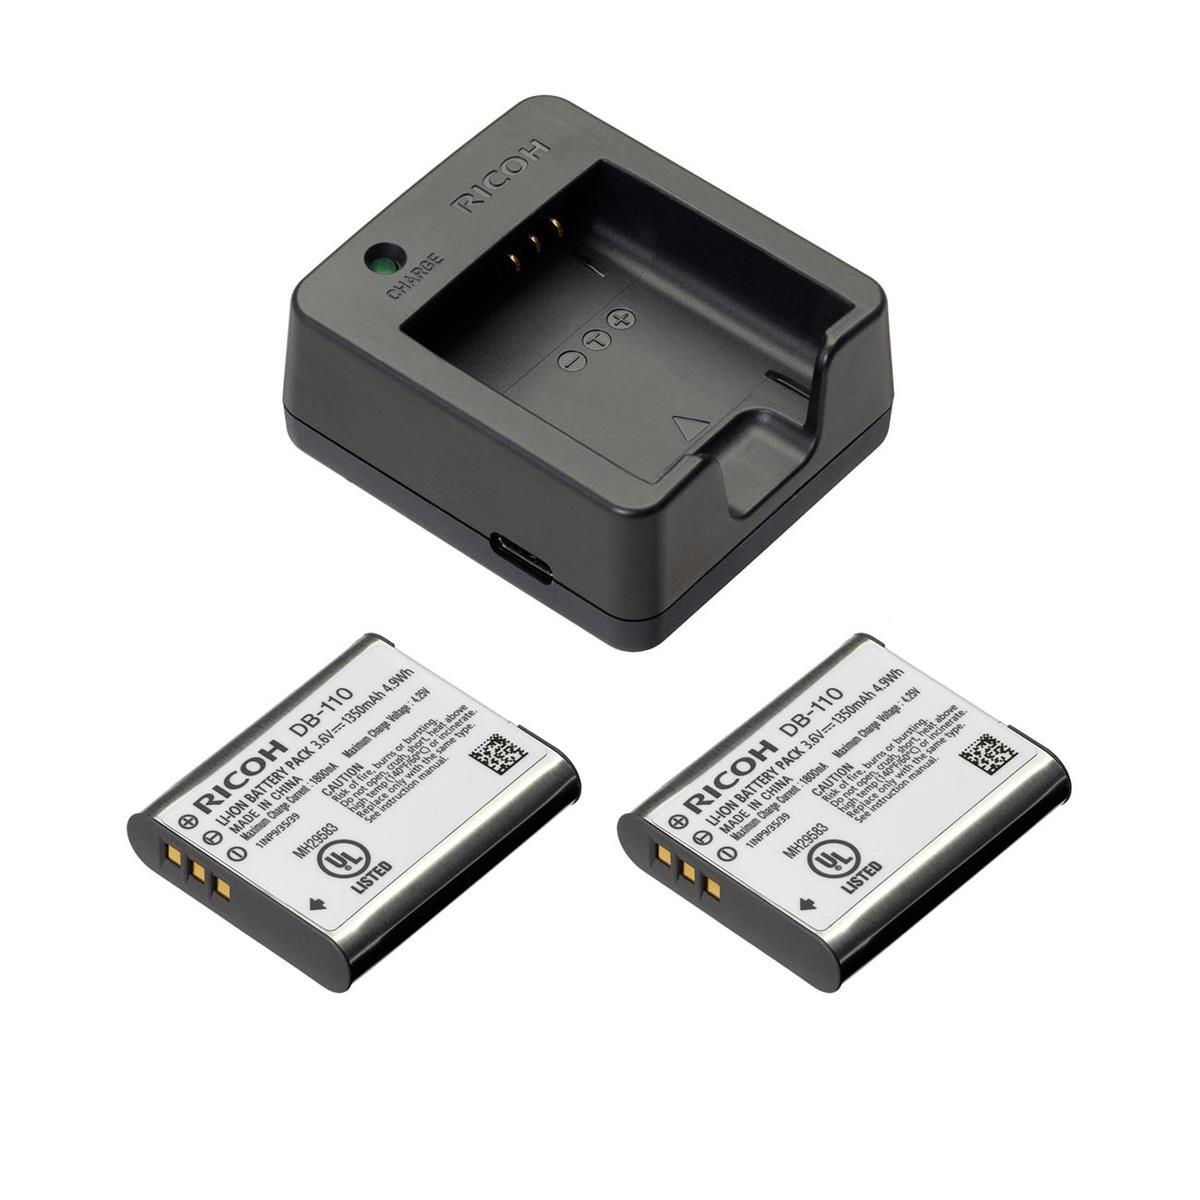 Image of Ricoh BJ-11 Battery Charger for DB-110 Battery With 2x DB110 Lithium-ion Battery